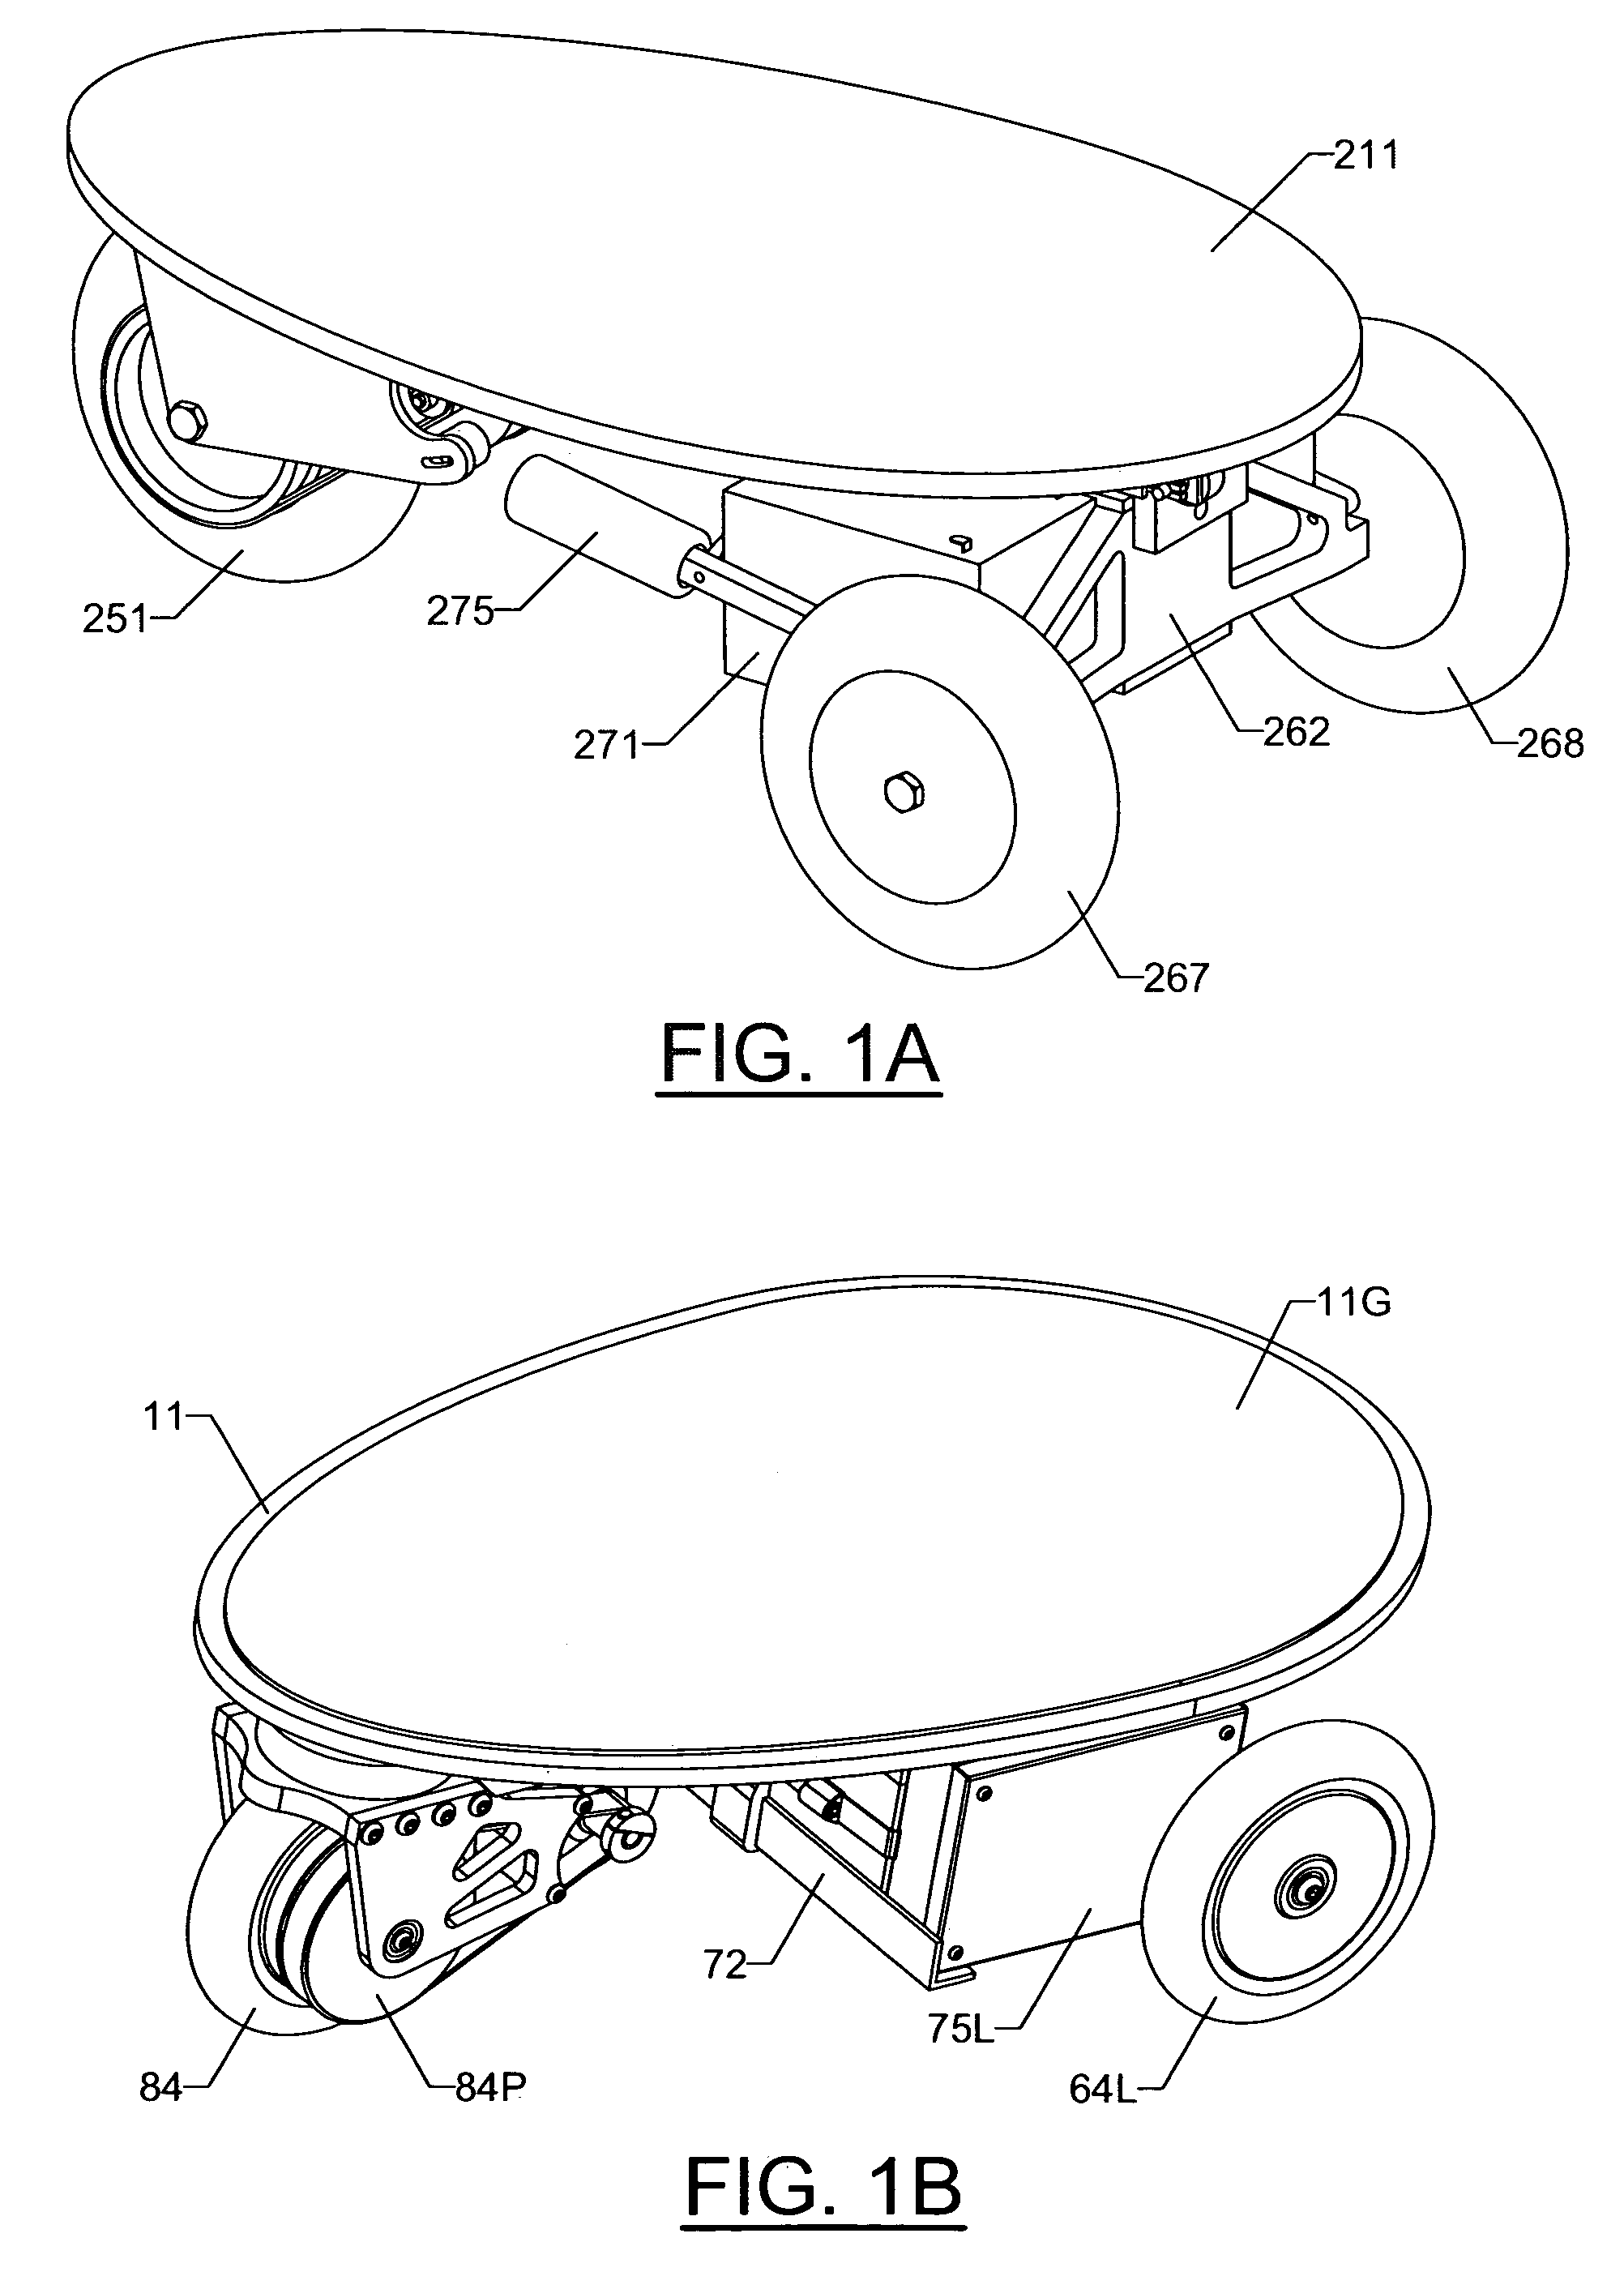 Foot-controlled motorized vehicle